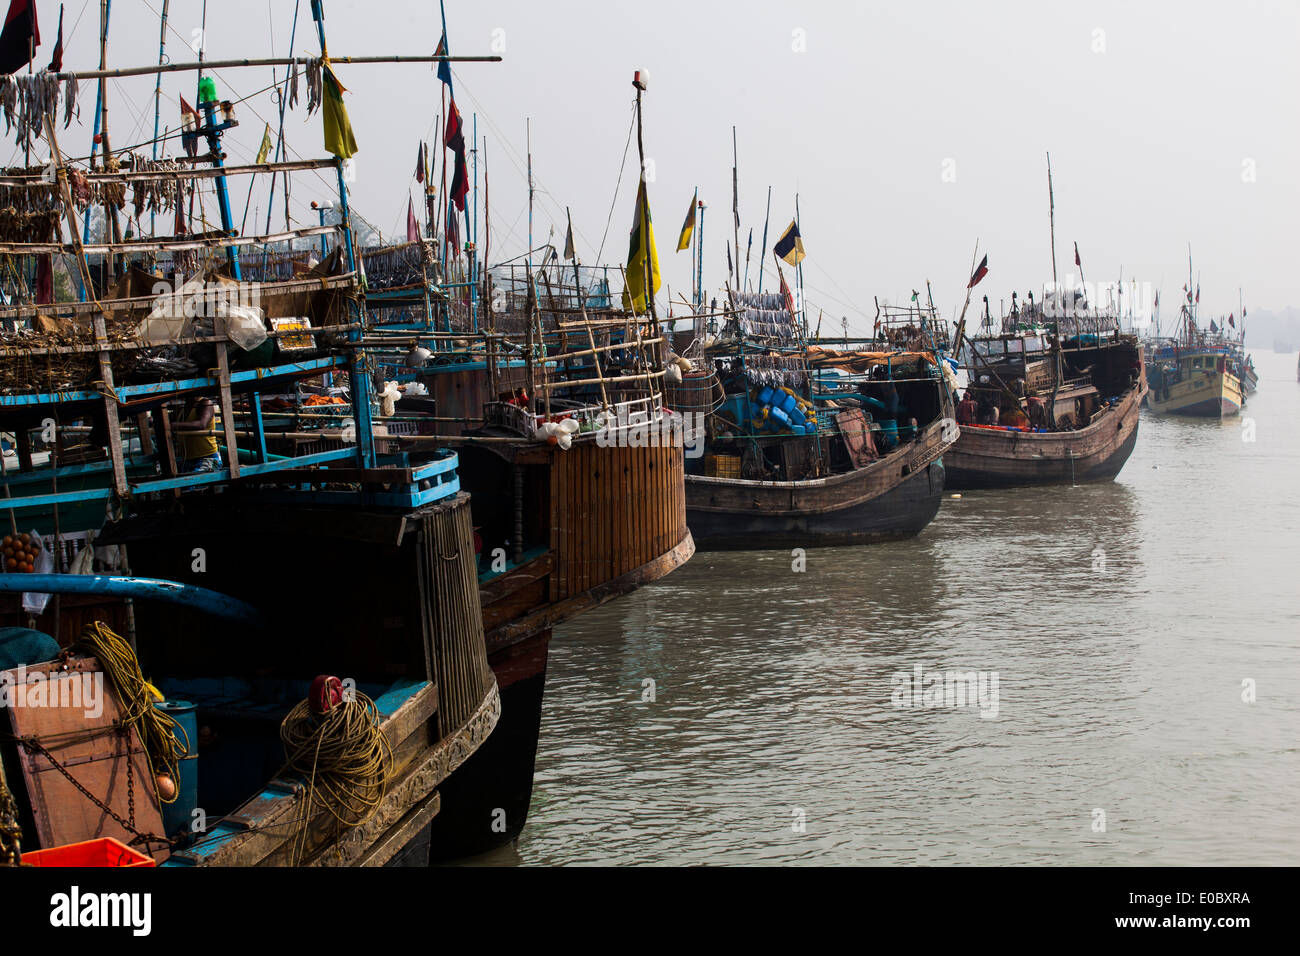 Fishing boats anchored in a harbour in Bangladesh Stock Photo